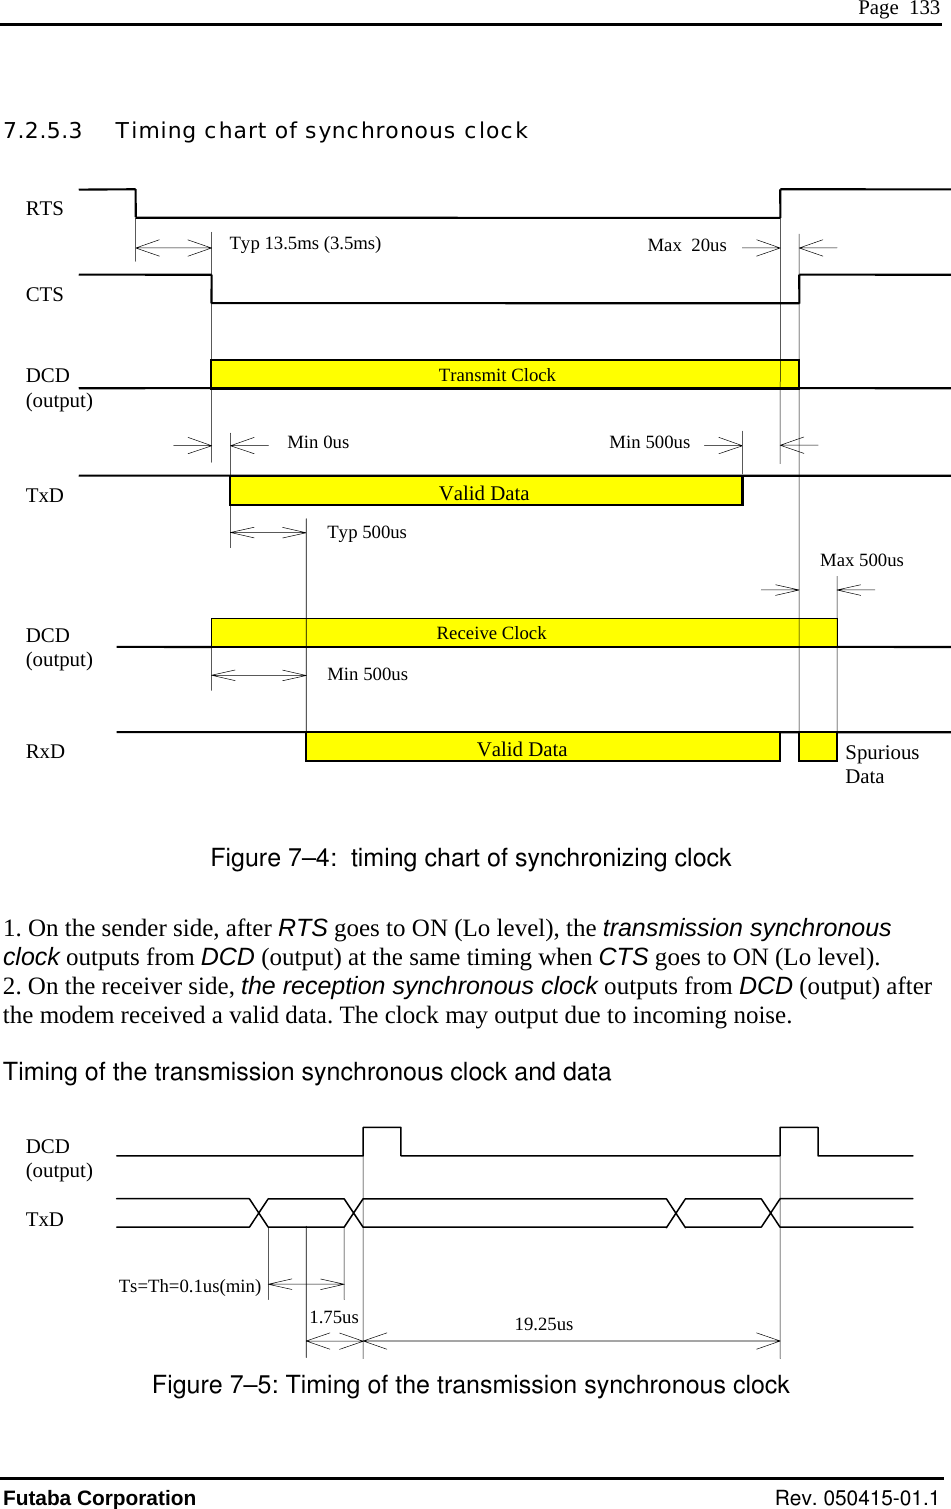  Page  133 7.2.5.3   Timing chart of synchronous clock         Figure 7–4:  timing chart of synchronizing clock . On the sender side, after RTS goes to ON (Lo level), the transmission synchronous lock outputs from DCD (output) at the same timing when CTS goes to ON (Lo level).  . On the receiver side, the reception synchronous clock outputs from DCD (output) after e modem received a valid data. The clock may output due to incoming noise. iming of the transmission synchronous clock and data Figure 7–5: Timing of the transmission synchronous clock    RTS  Max  20us Typ 13.5ms (3.5ms)             1c2th T         Min 0usValid DataMin 500us Transmit ClockValid DataReceive Clock CTS DCD Typ 500usMax 500uMin 500uss1.75us  19.25us (output) TxD DCD RxD  Spurious Data (output) DCD (output) TxD Ts=Th=0.1us(min) Futaba Corporation Rev. 050415-01.1 